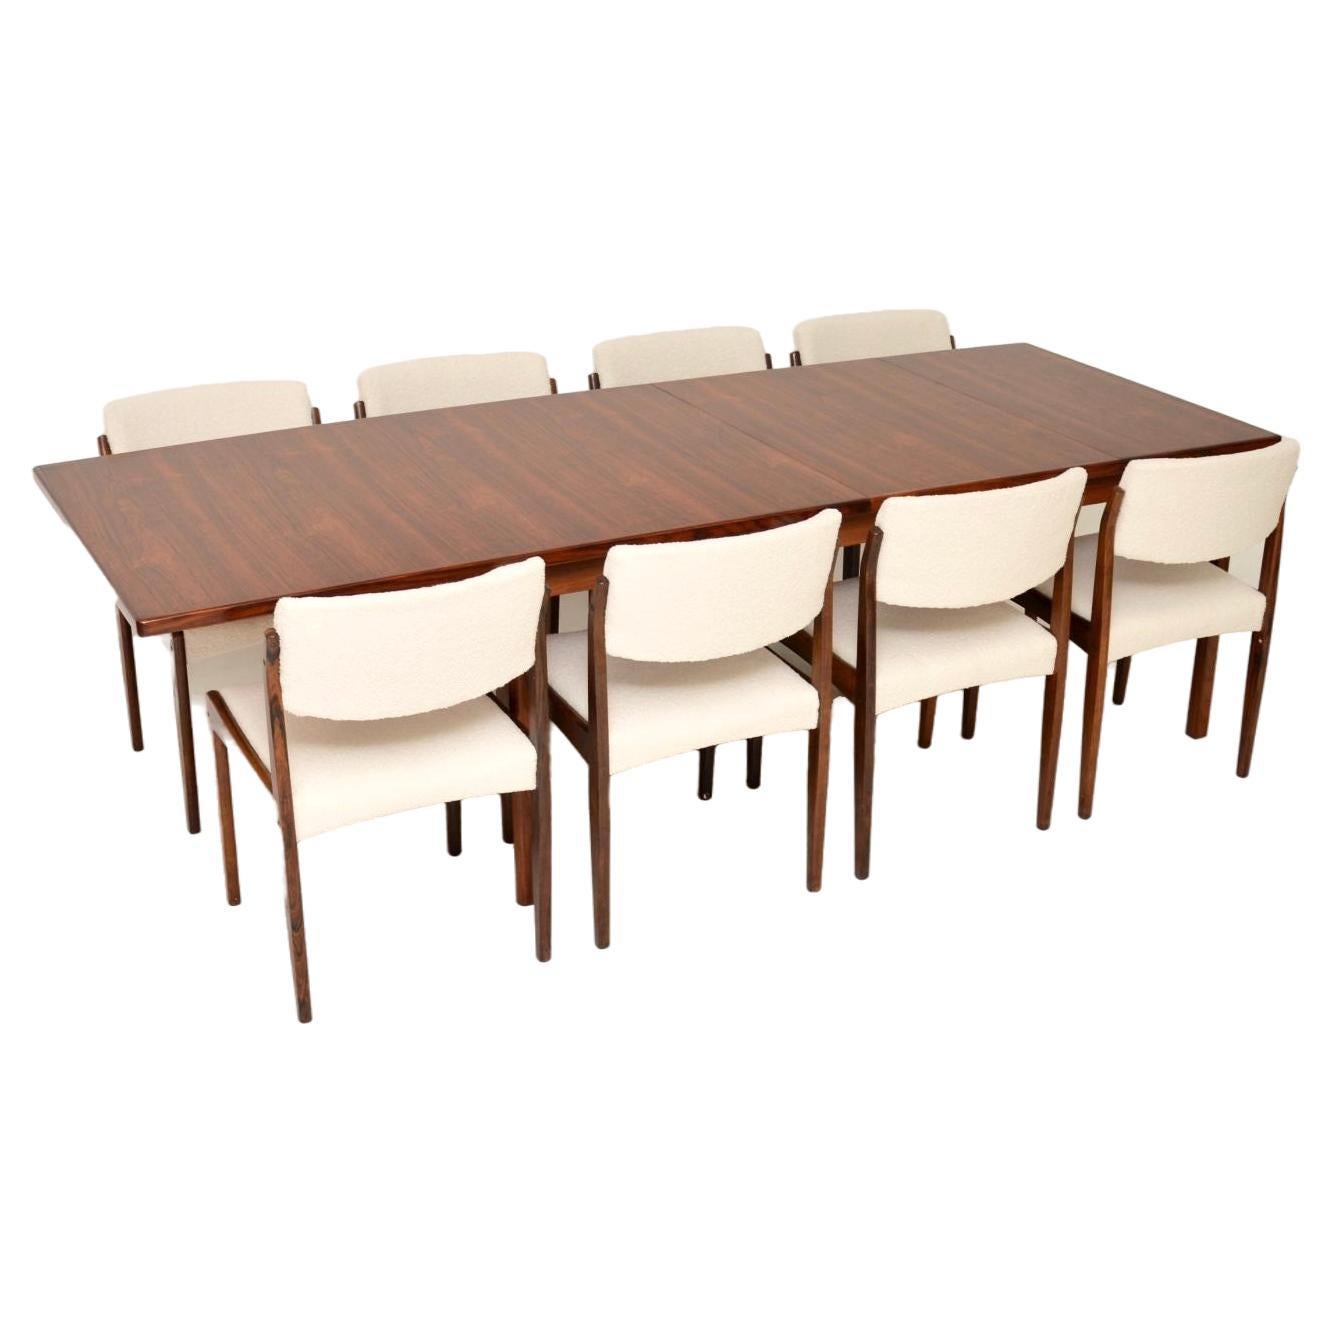 Vintage Dining Table and Eight Chairs by Robert Heritage for Archie Shine